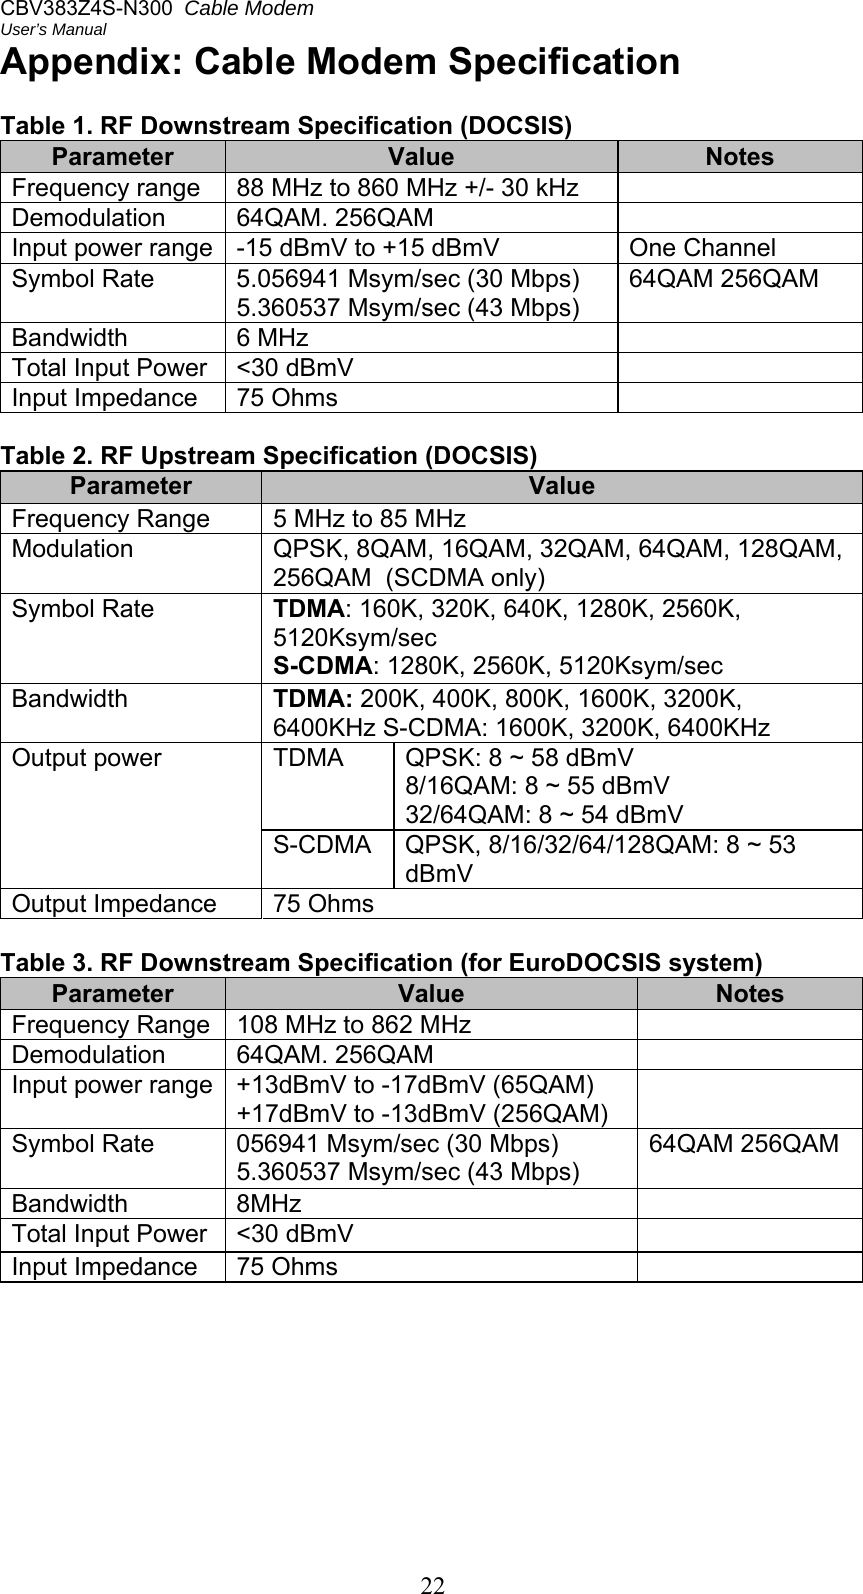 CBV383Z4S-N300  Cable Modem  User’s Manual 22 Appendix: Cable Modem Specification  Table 1. RF Downstream Specification (DOCSIS) Parameter Value Notes Frequency range  88 MHz to 860 MHz +/- 30 kHz   Demodulation  64QAM. 256QAM   Input power range  -15 dBmV to +15 dBmV  One Channel  Symbol Rate  5.056941 Msym/sec (30 Mbps) 5.360537 Msym/sec (43 Mbps) 64QAM 256QAM  Bandwidth   6 MHz   Total Input Power  &lt;30 dBmV   Input Impedance  75 Ohms    Table 2. RF Upstream Specification (DOCSIS) Parameter Value Frequency Range  5 MHz to 85 MHz Modulation  QPSK, 8QAM, 16QAM, 32QAM, 64QAM, 128QAM, 256QAM  (SCDMA only) Symbol Rate  TDMA: 160K, 320K, 640K, 1280K, 2560K, 5120Ksym/sec S-CDMA: 1280K, 2560K, 5120Ksym/sec Bandwidth  TDMA: 200K, 400K, 800K, 1600K, 3200K, 6400KHz S-CDMA: 1600K, 3200K, 6400KHz Output power  TDMA  QPSK: 8 ~ 58 dBmV 8/16QAM: 8 ~ 55 dBmV 32/64QAM: 8 ~ 54 dBmV S-CDMA  QPSK, 8/16/32/64/128QAM: 8 ~ 53 dBmV Output Impedance  75 Ohms  Table 3. RF Downstream Specification (for EuroDOCSIS system) Parameter Value Notes Frequency Range  108 MHz to 862 MHz   Demodulation  64QAM. 256QAM   Input power range  +13dBmV to -17dBmV (65QAM) +17dBmV to -13dBmV (256QAM)   Symbol Rate  056941 Msym/sec (30 Mbps) 5.360537 Msym/sec (43 Mbps) 64QAM 256QAM Bandwidth  8MHz   Total Input Power  &lt;30 dBmV   Input Impedance  75 Ohms    